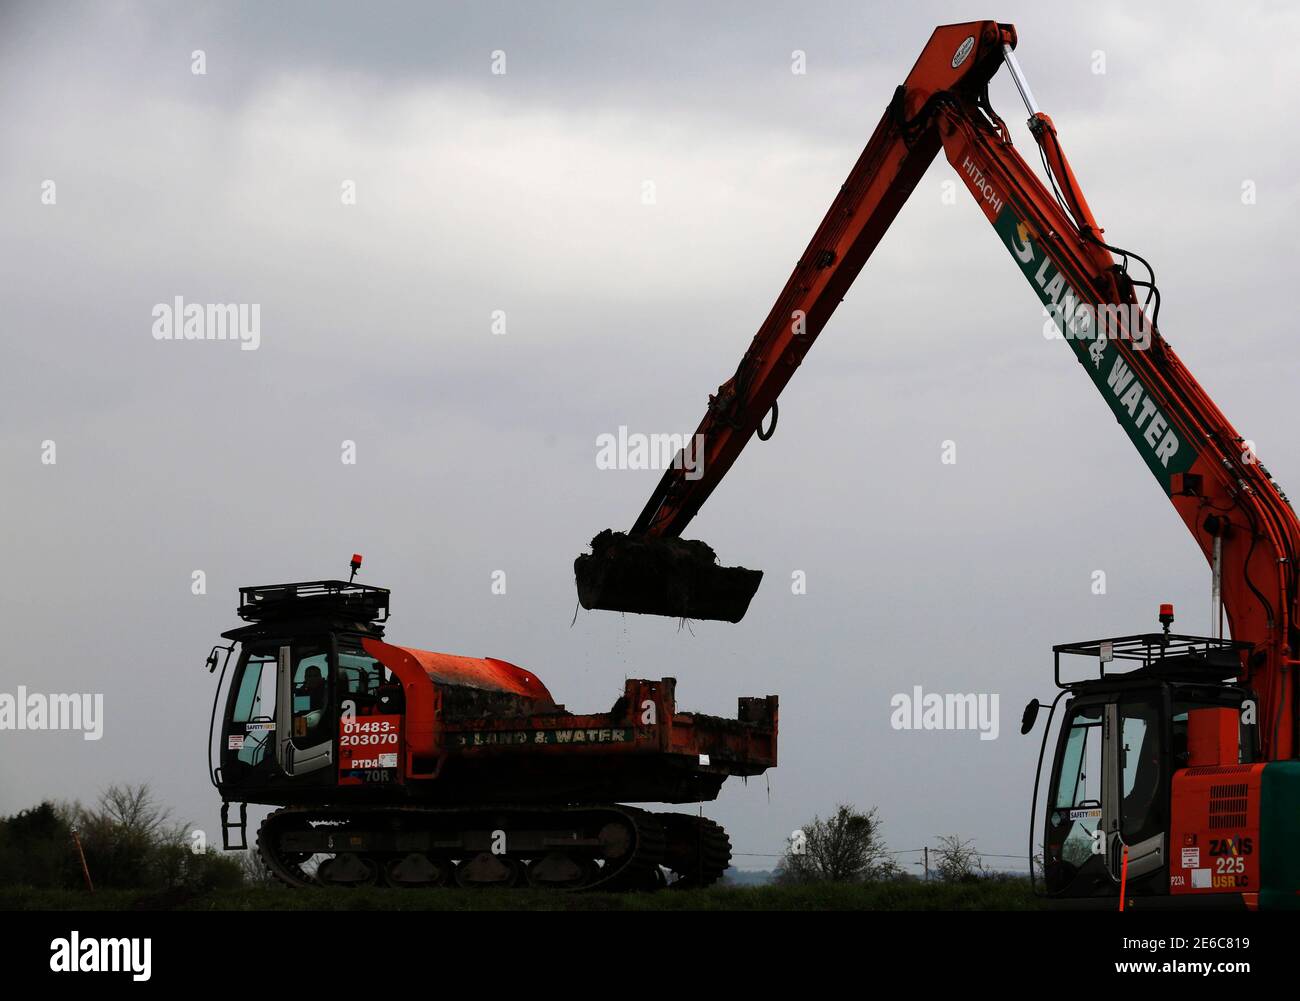 Dredging work on the River Parrett begins at Burrowbridge, after floods caused months of disruption in the coastal region of the Somerset Levels, in southwest England March 31, 2014. REUTERS/Luke MacGregor (BRITAIN - Tags: ENVIRONMENT BUSINESS CONSTRUCTION) Stock Photo